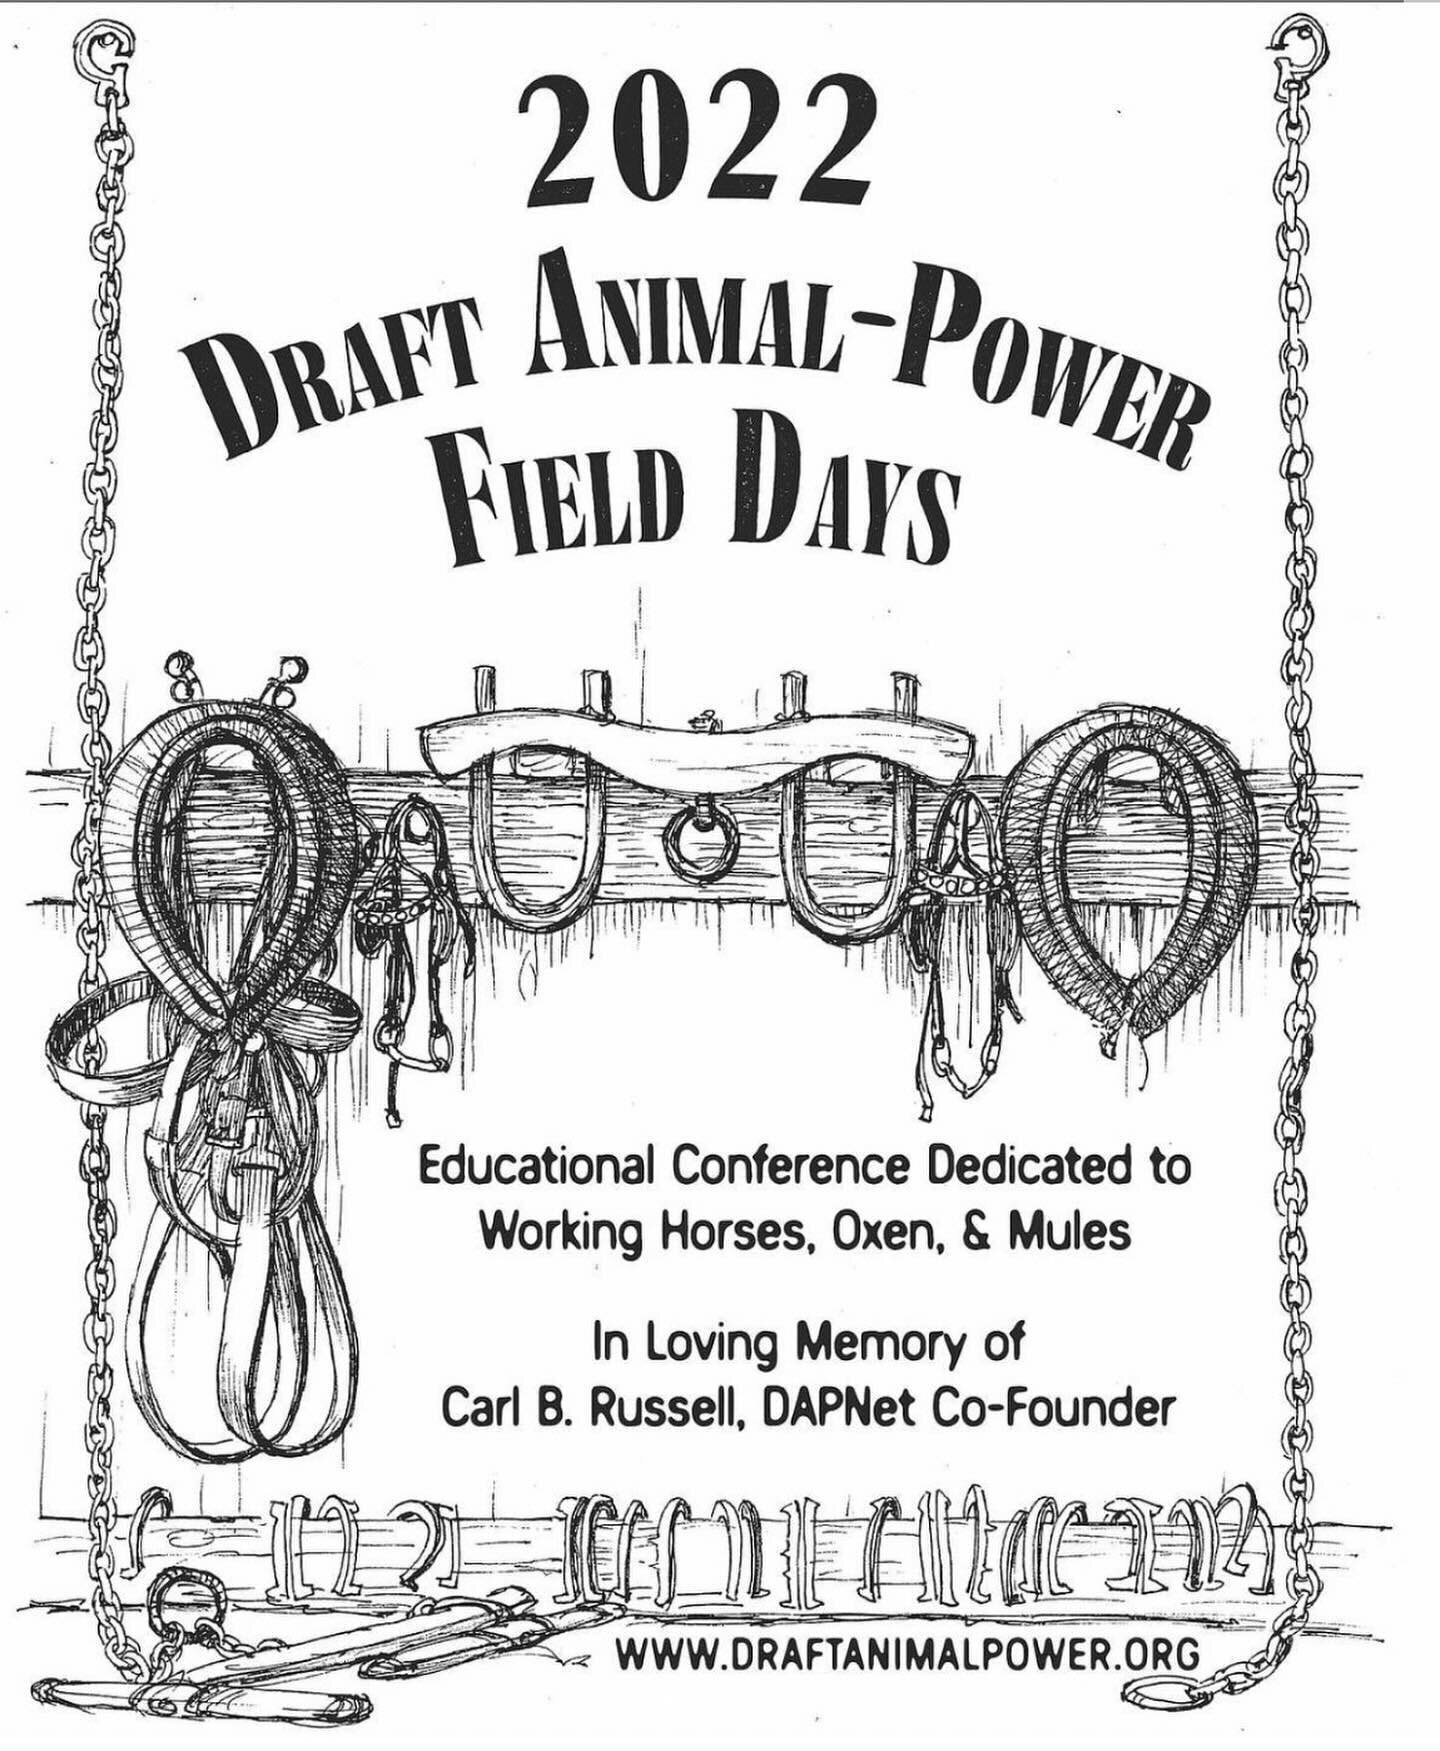 Calling all Artists! 

Do you want to see your art on hundreds of t-shirts, advertisements, and posters? DAPNet is looking for a new design to put on our 2024 Draft Animal-Power Field Days merchandise and promotions. Submit your entry to dapnetinfo@g